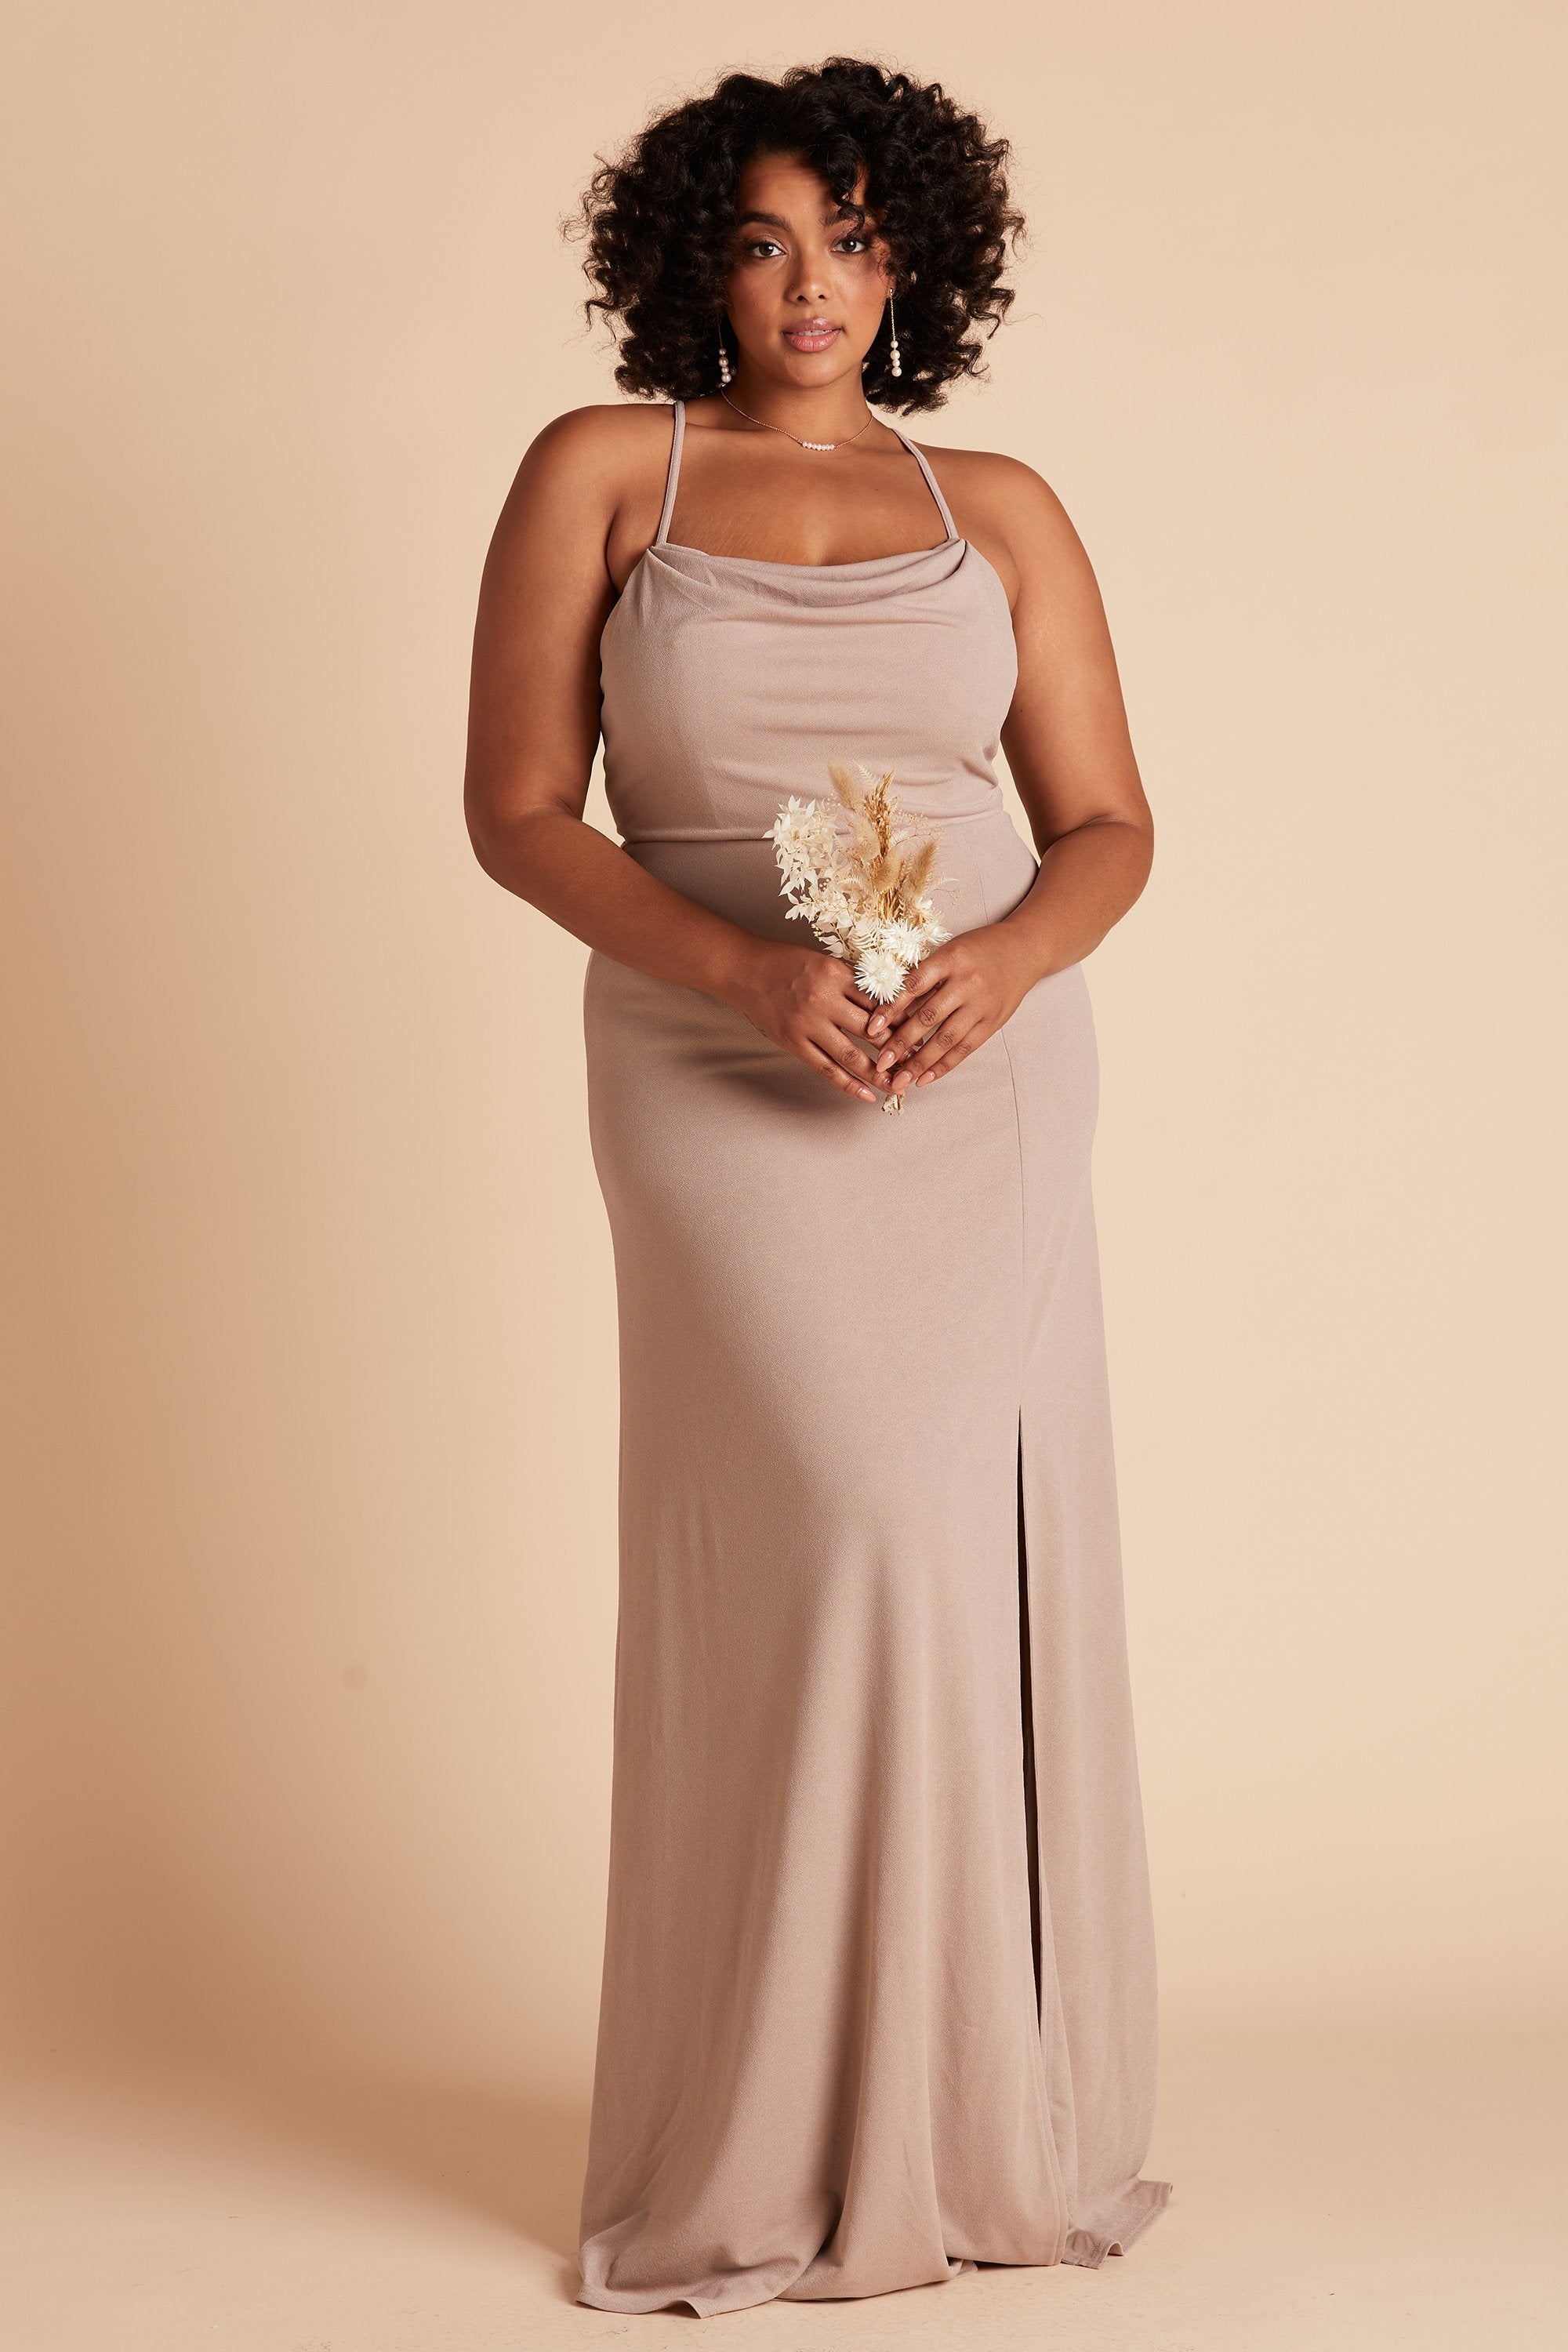 Front view of the floor-length Ash Plus Size Bridesmaid Dress in taupe crepe by Birdy Grey with a slightly draped cowl neck front. The flowing skirt features a slit over the front left leg.